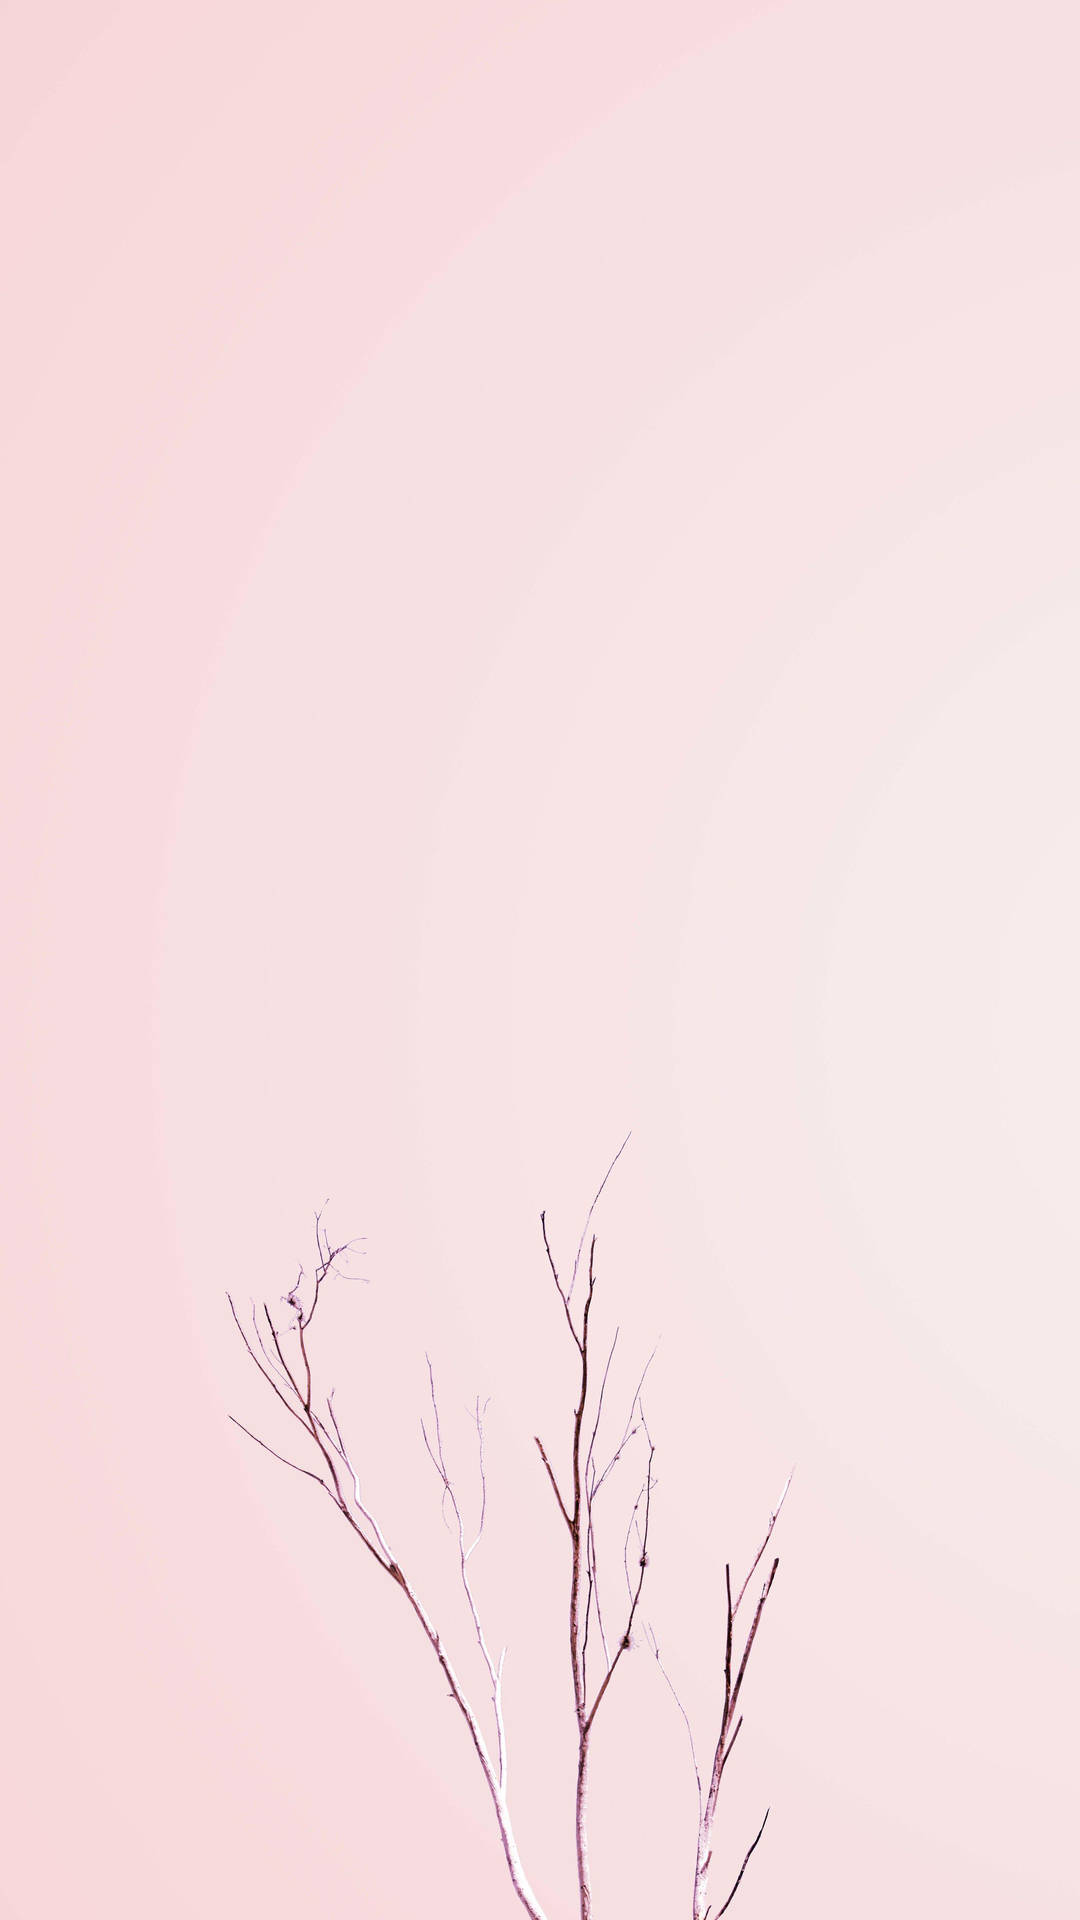 Minimalist Aesthetic Pink Tree Branches Wallpaper